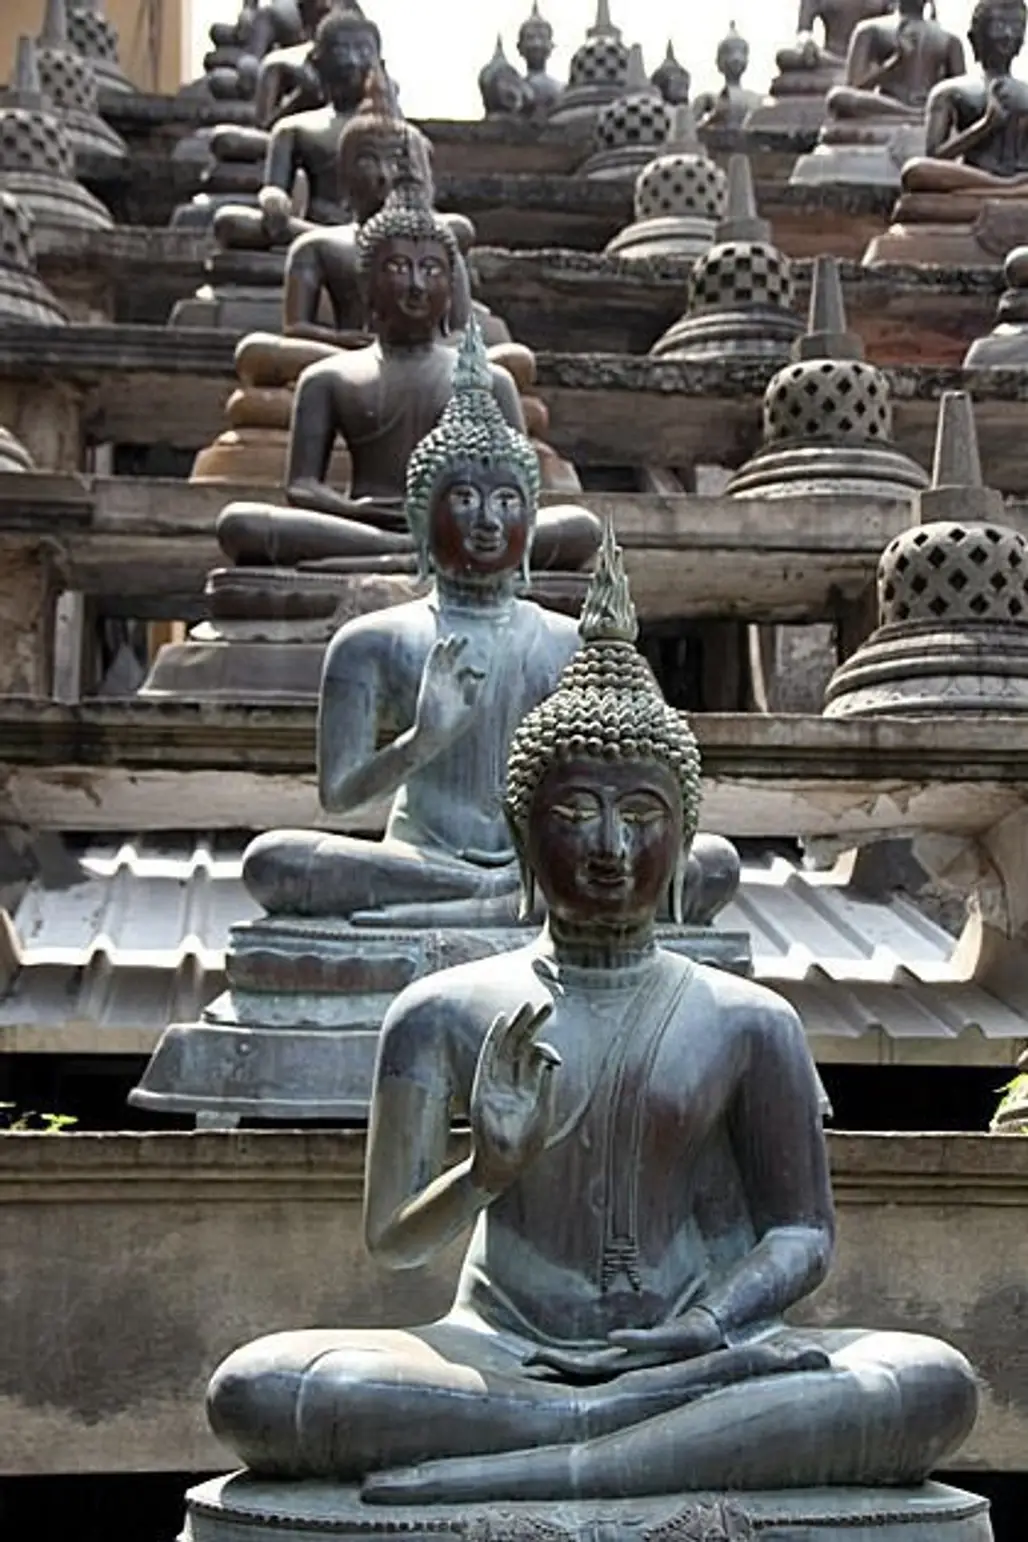 See a Collection of Buddhas